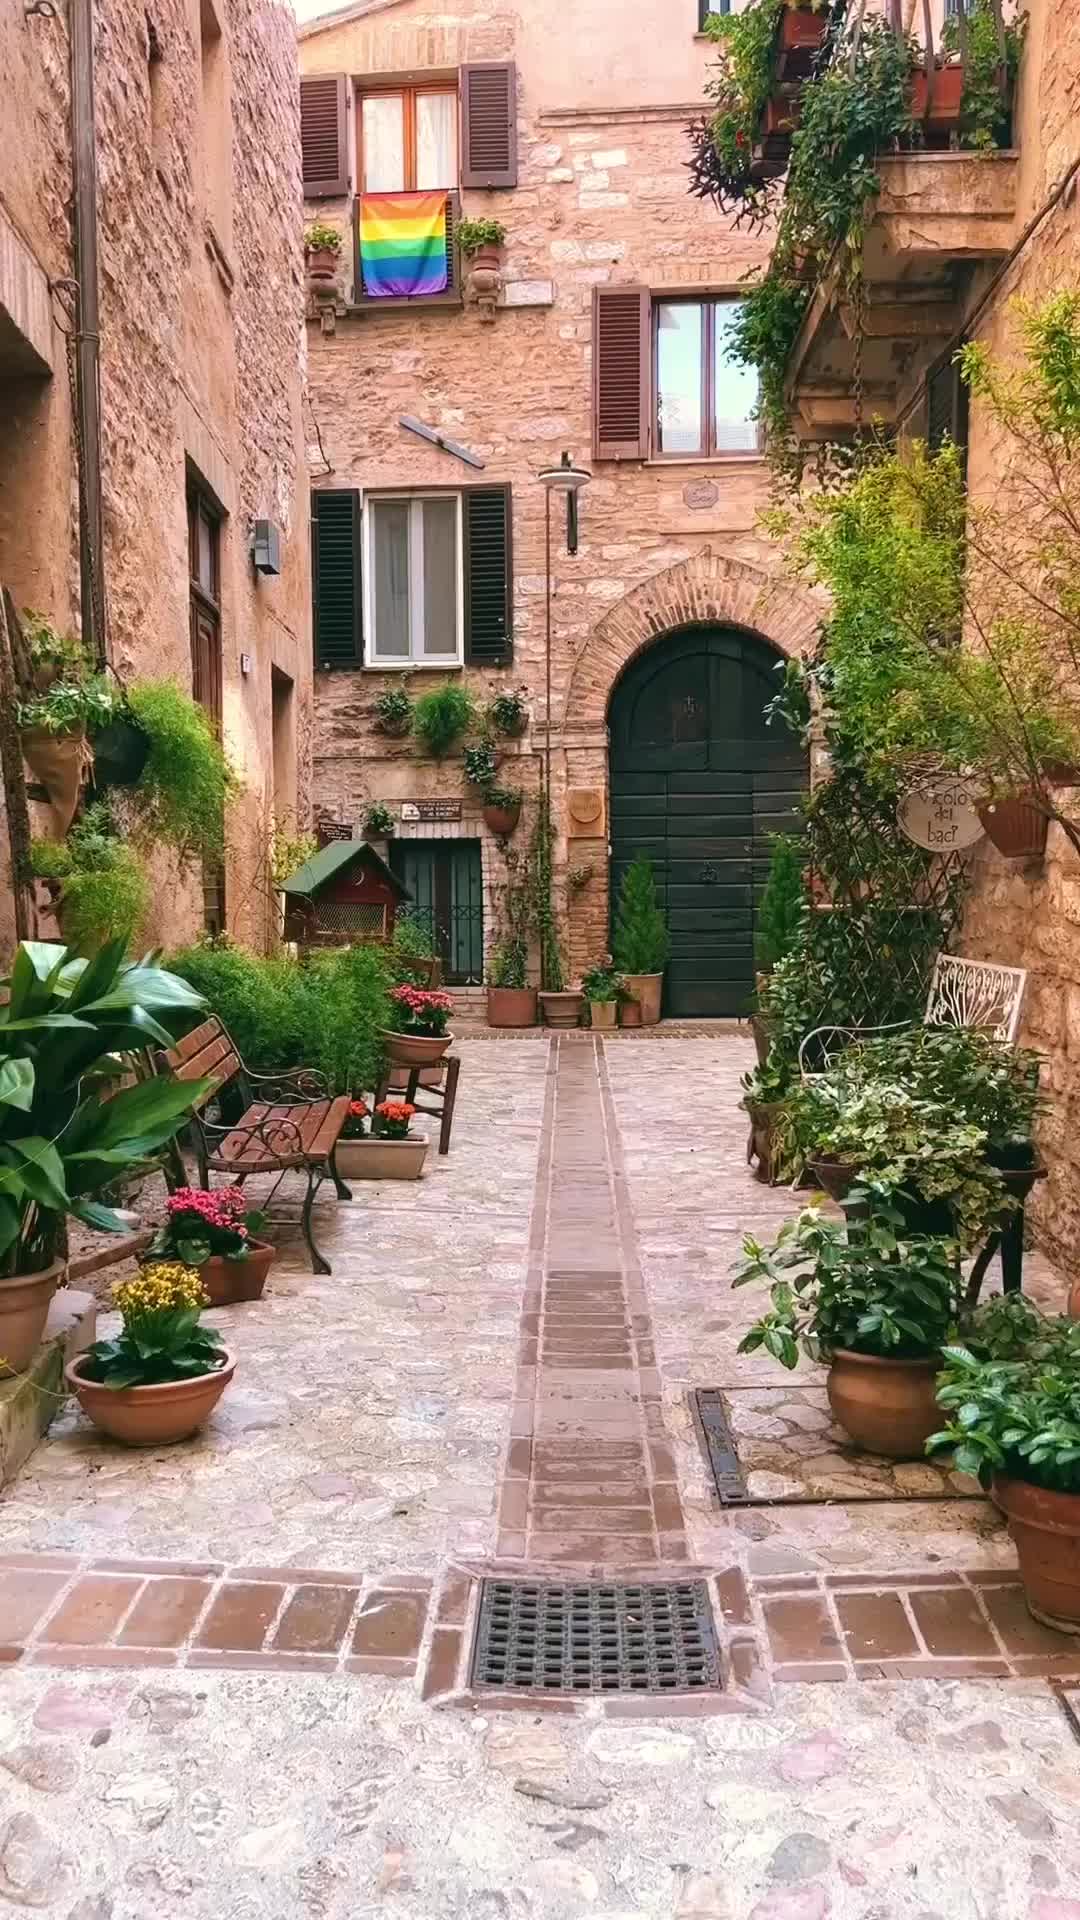 Discover Hidden Gem Spello, Italy - A Must-Visit Town